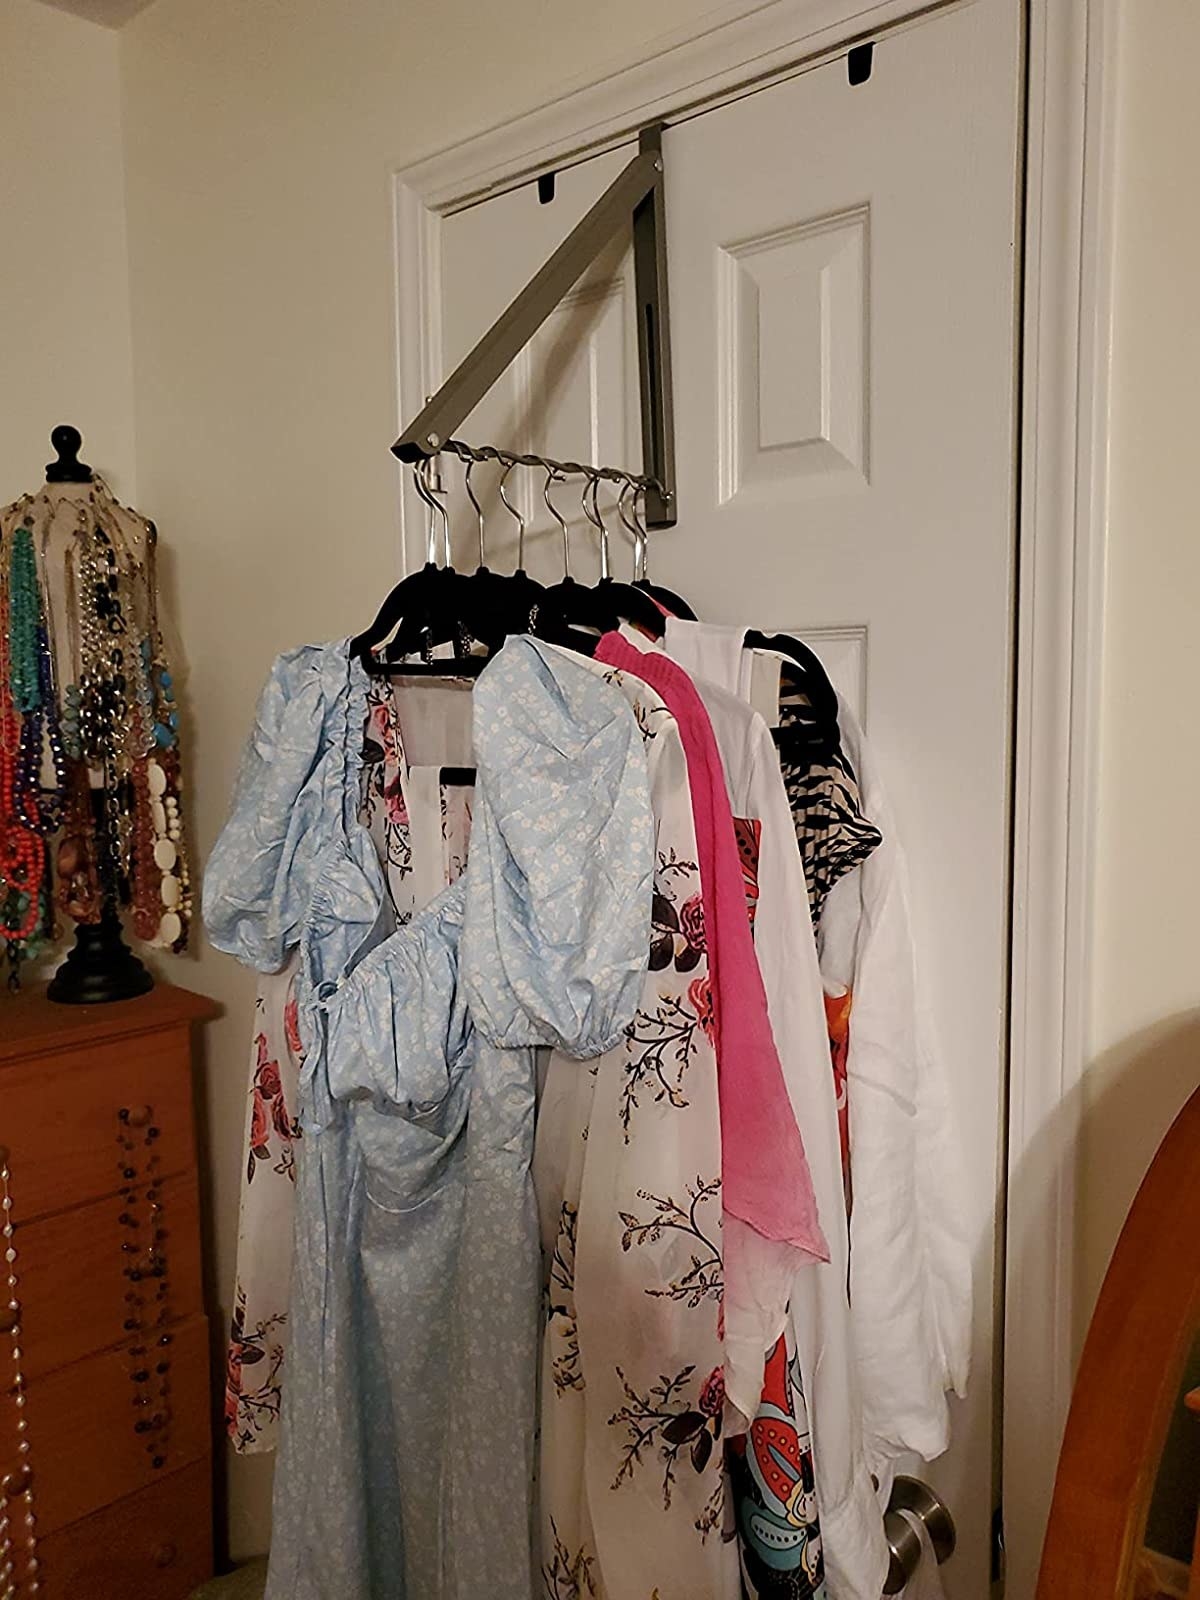 a reviewer photo of the rack with clothes hanging on it